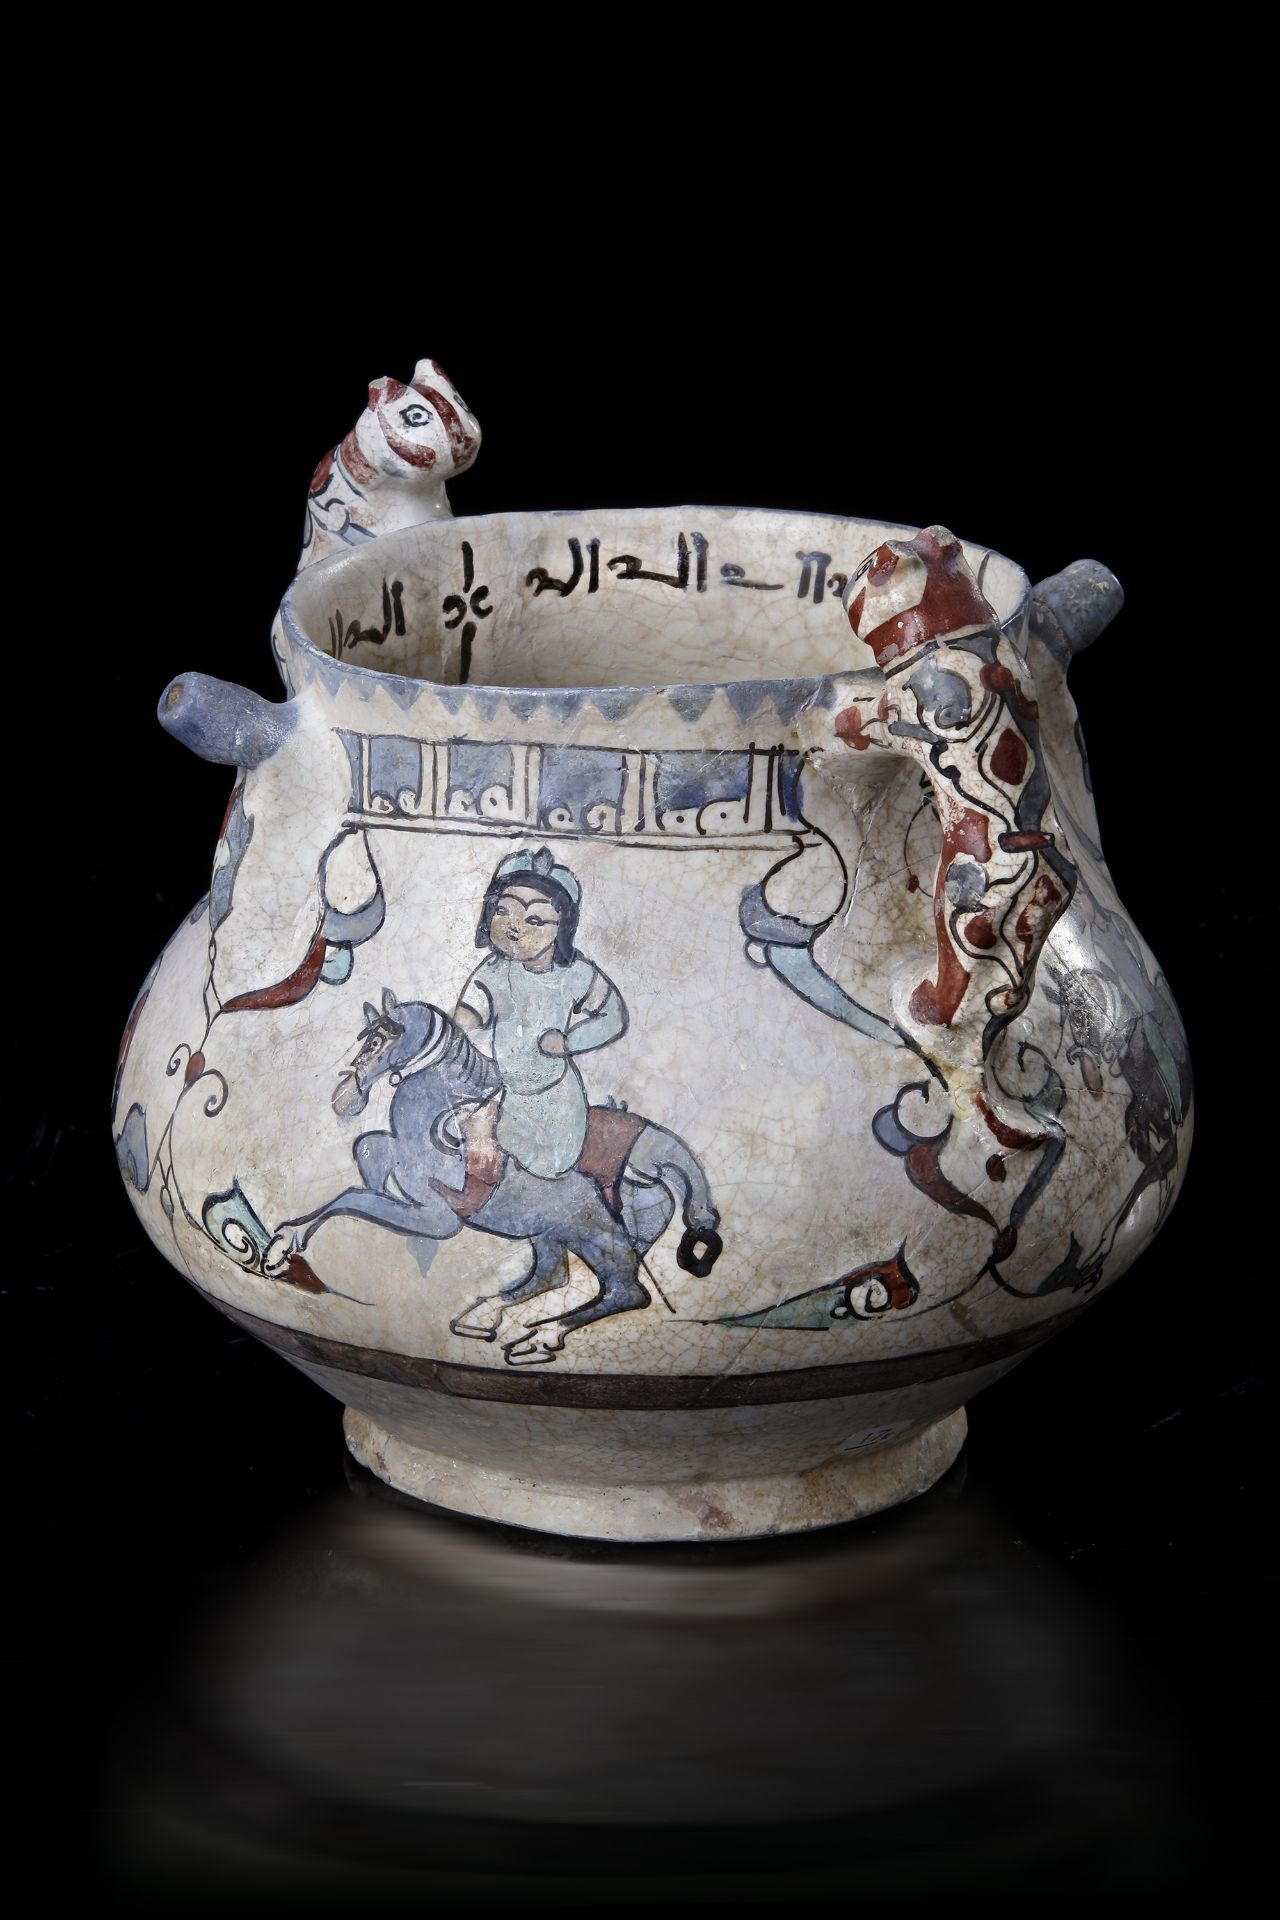 AN ISLAMIC VASE WITH ZOOMORPHIC HANDLES, PERSIA, KASHAN, LATE 12TH-EARLY 13TH CENTURY - Image 2 of 5